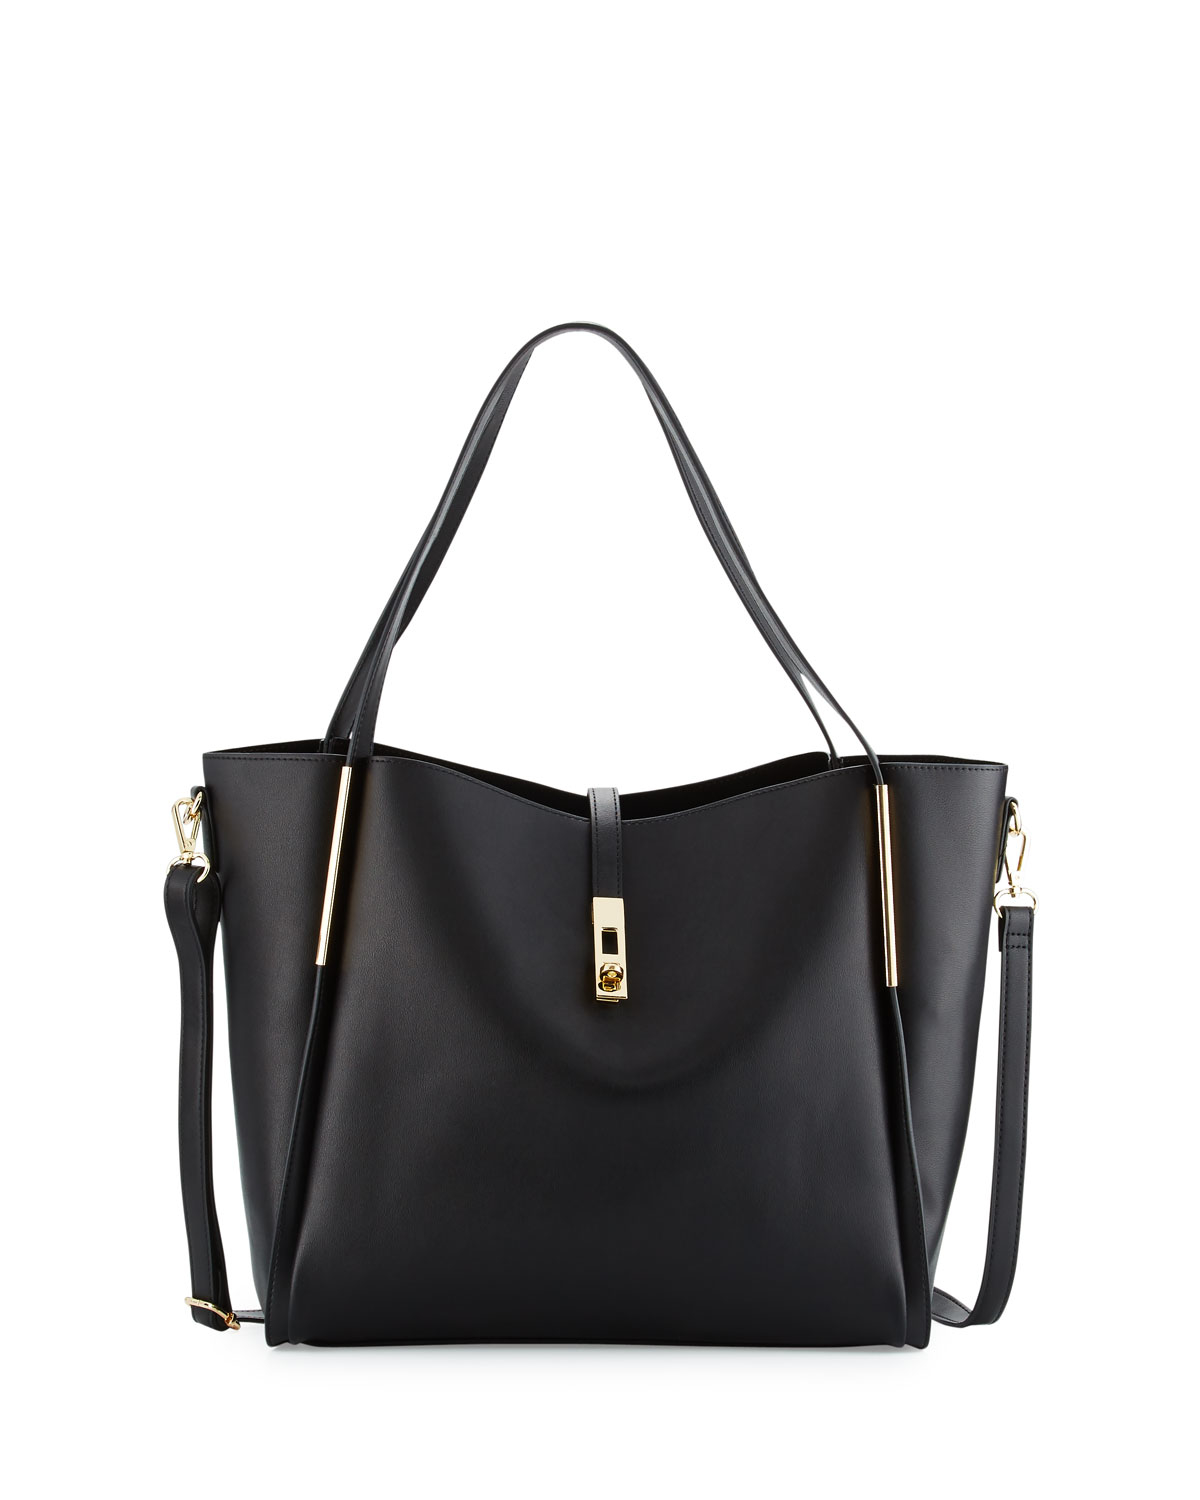 Neiman marcus Abigail Faux-leather Tote Bag in Black | Lyst